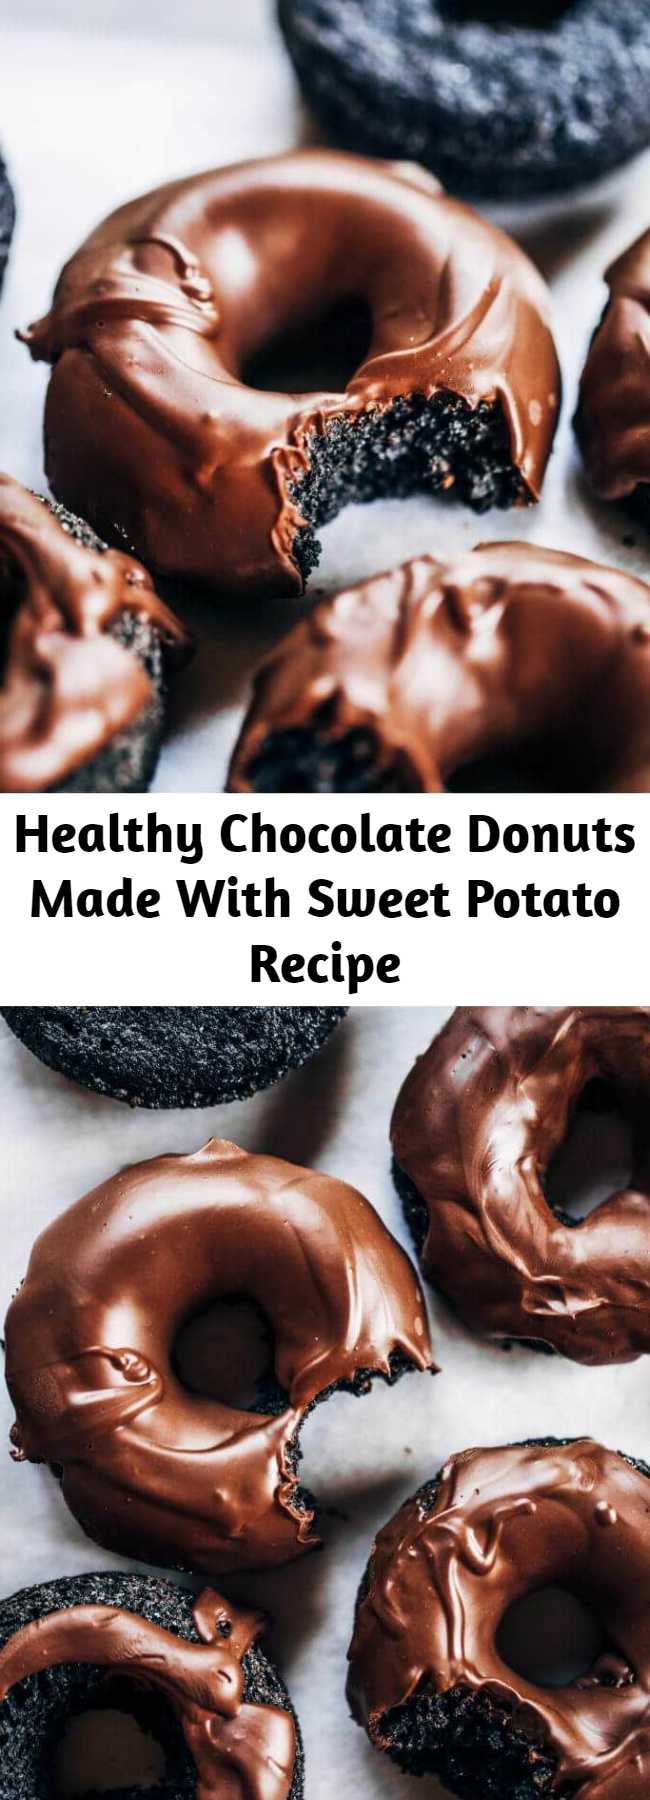 Healthy Chocolate Donuts Made With Sweet Potato Recipe - Healthy paleo chocolate glazed donuts made with sweet potato instead of flour! Easy baked donut recipe perfect for celebrations! #paleo #donuts #baking #recipes #cooking